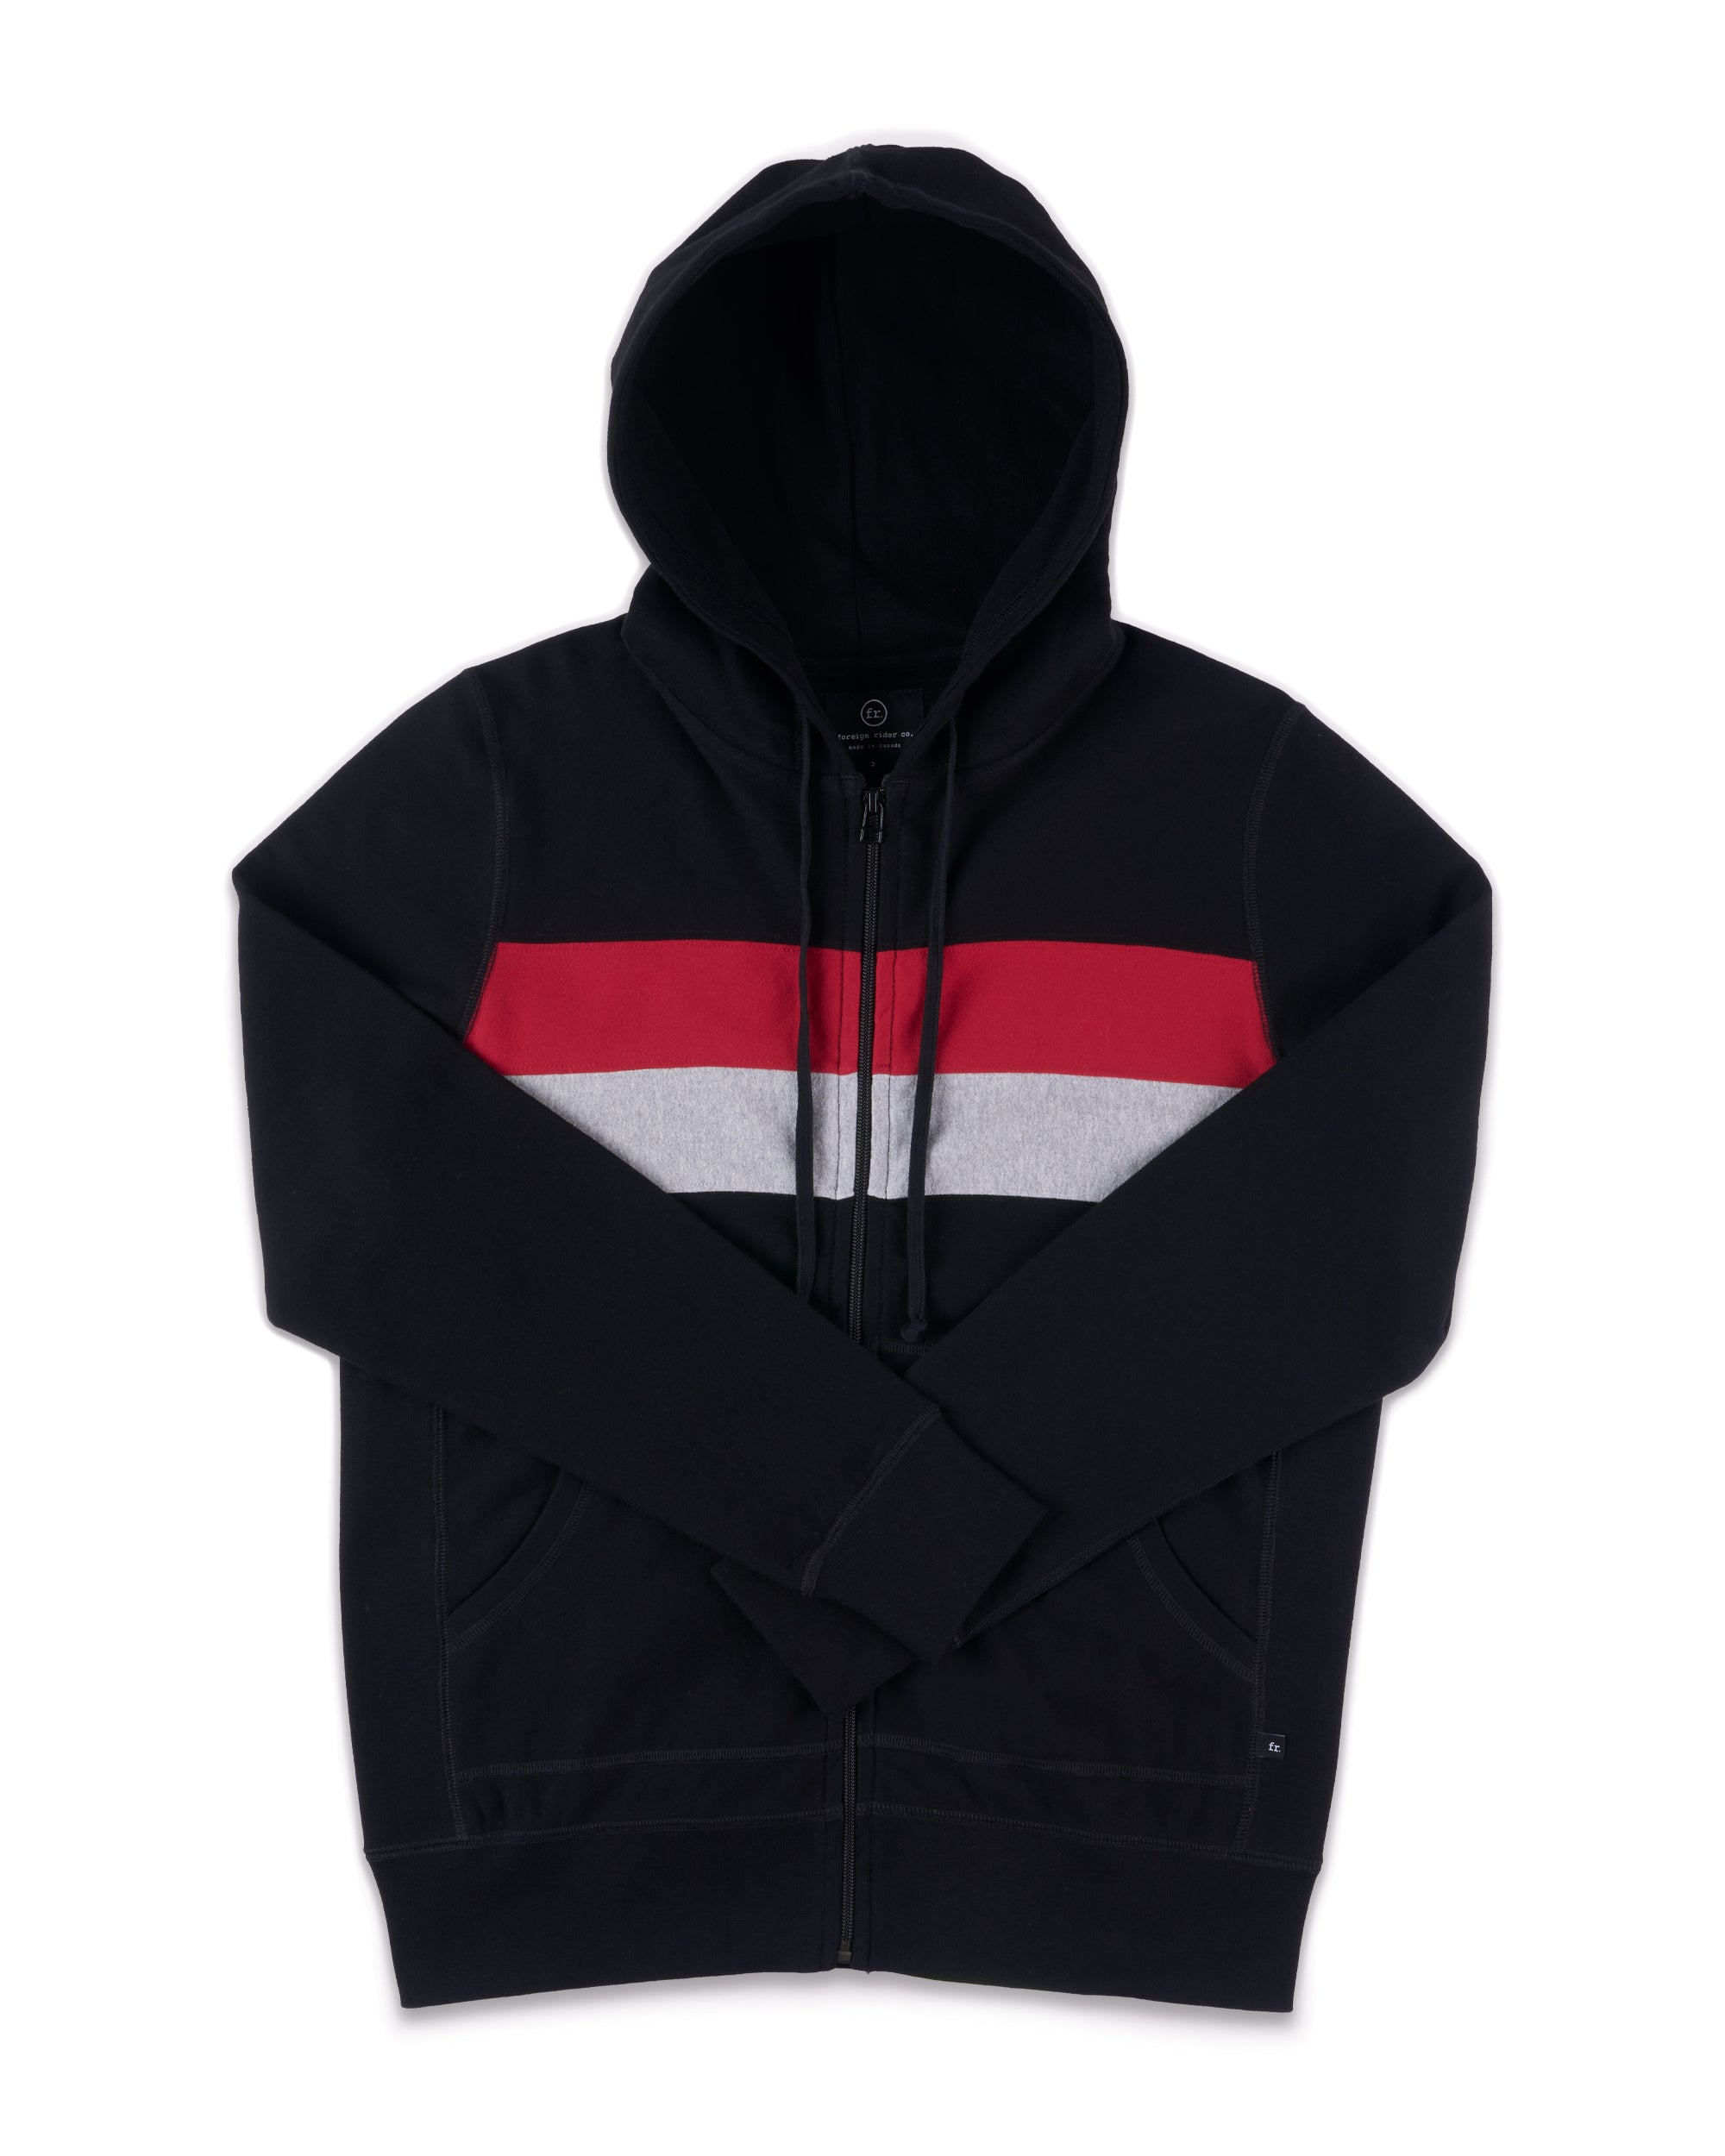 Striped Full Zip Hooded Sweatshirt Black - Foreign Rider Co.